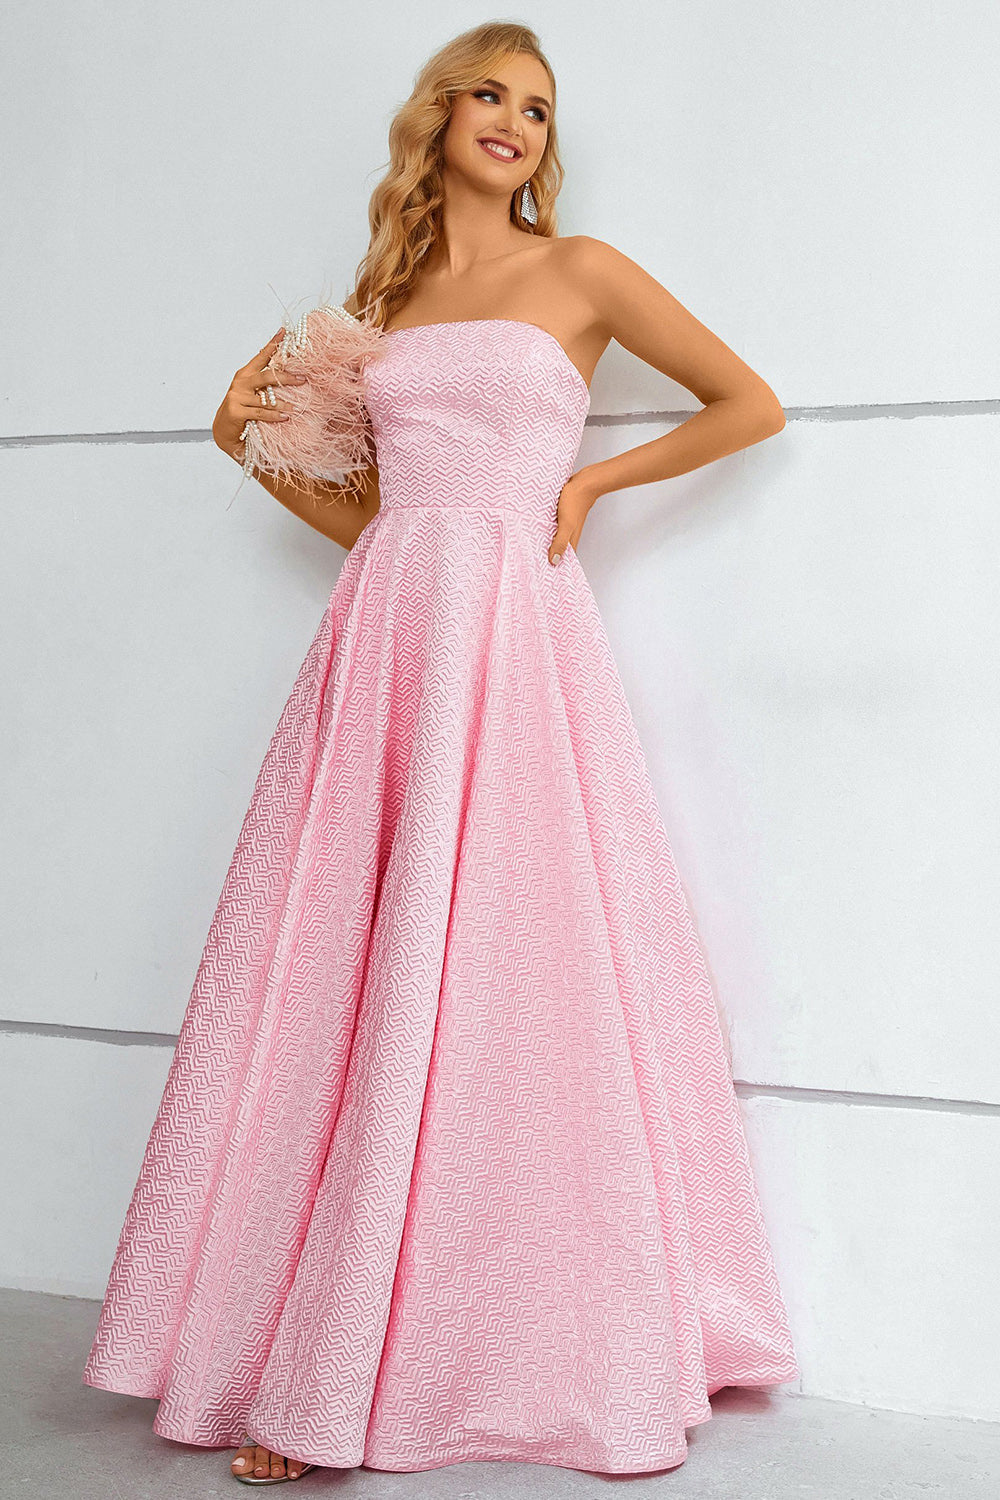 Pink Lace Up A-Line Strapless Prom Dress